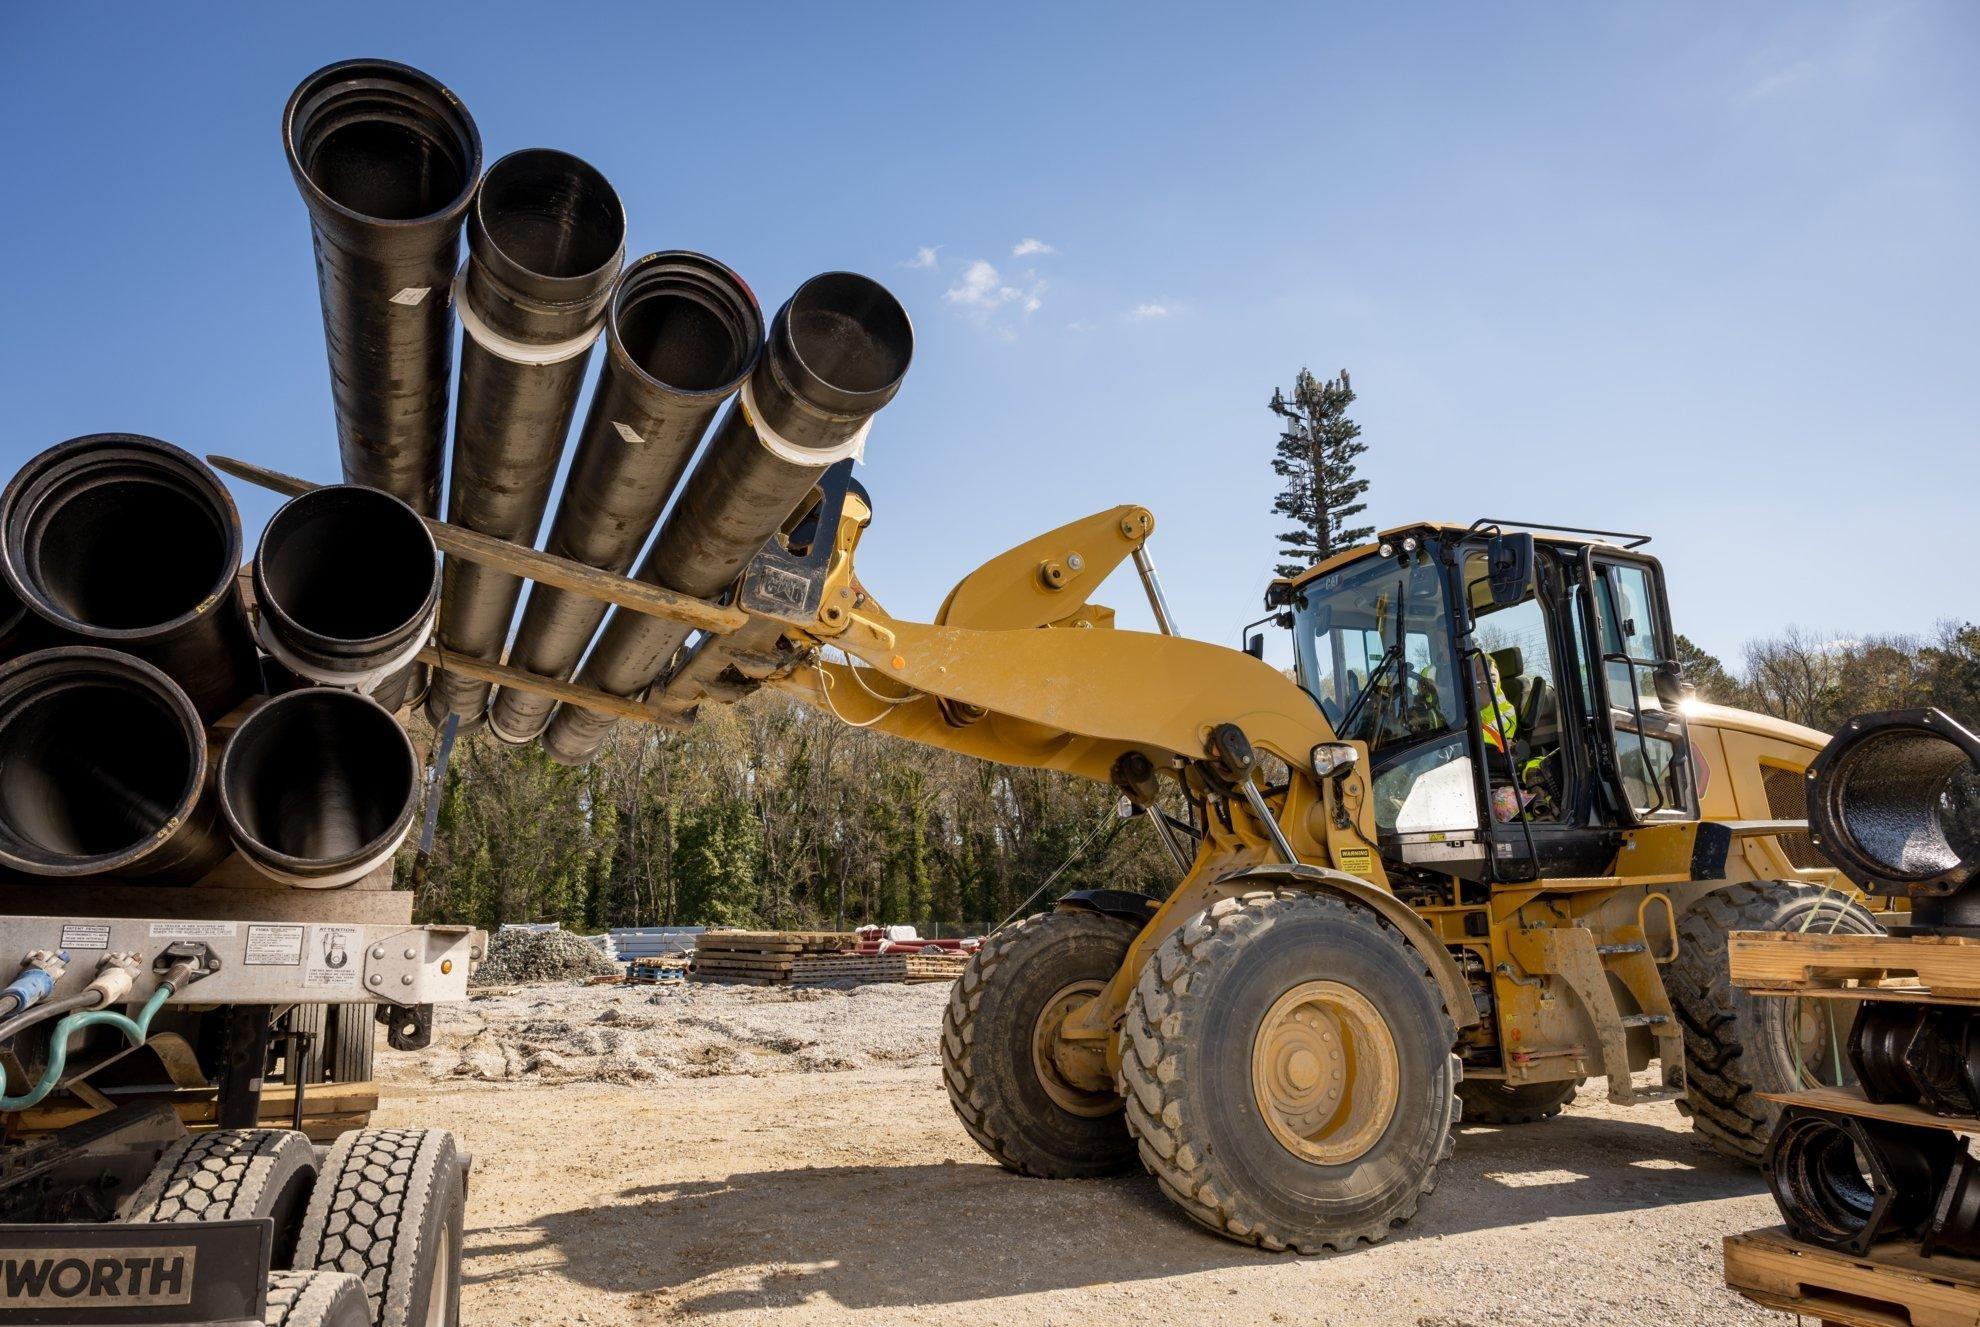 A front-end loader removes industrial pipe from a flatbed on a construction site.